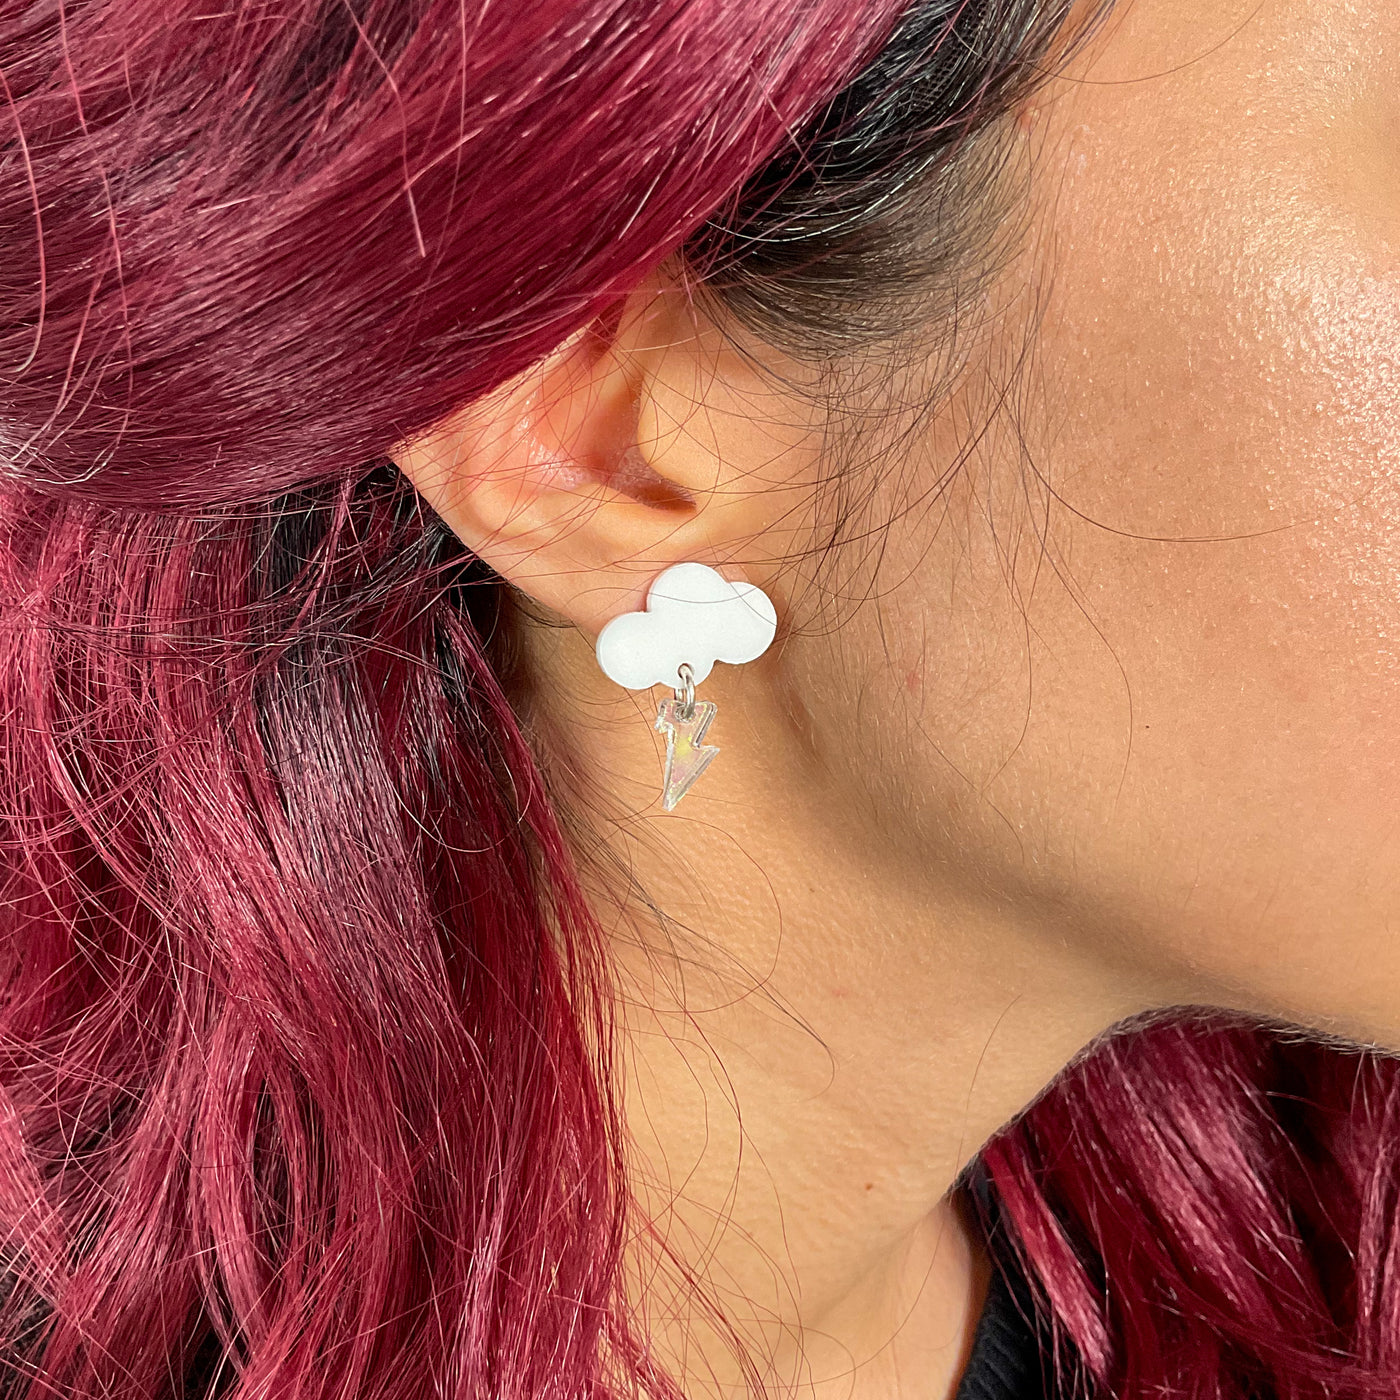 Solid white small cloud earrings with a transparent bolt on a woman's ear surrounded by burgundy hair. 